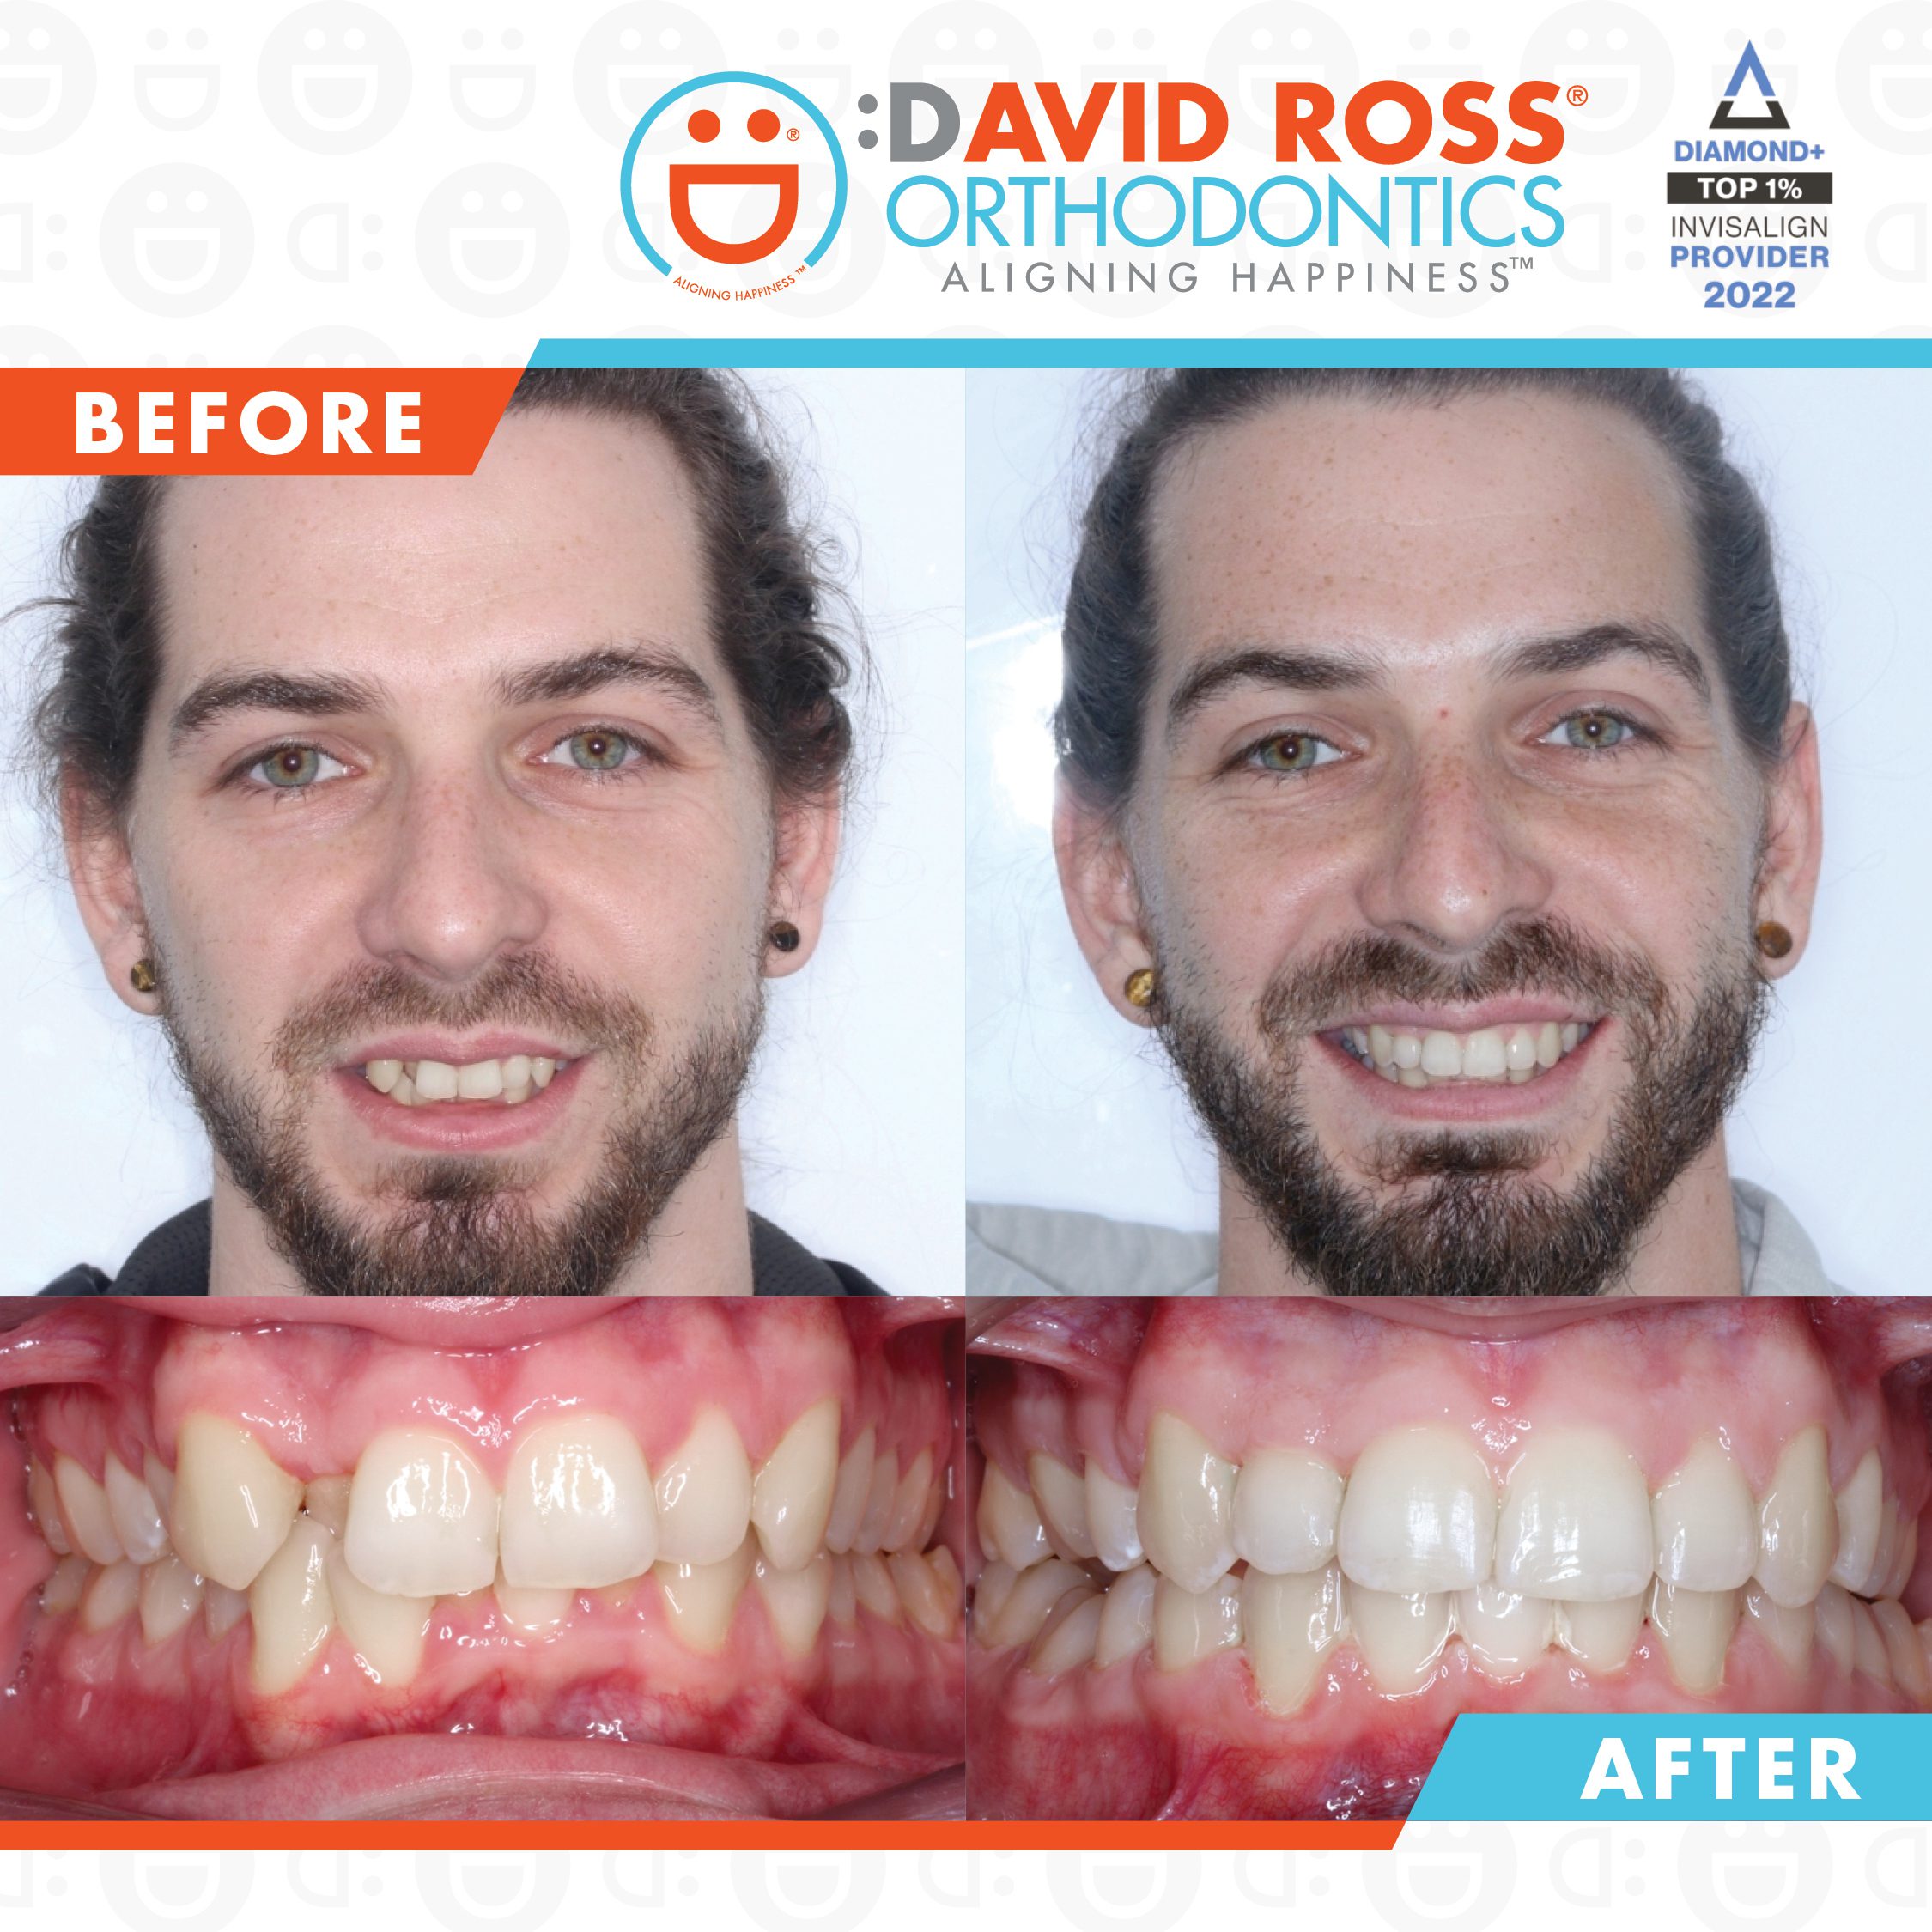 Life With Invisalign: What to Expect With Invisible Braces